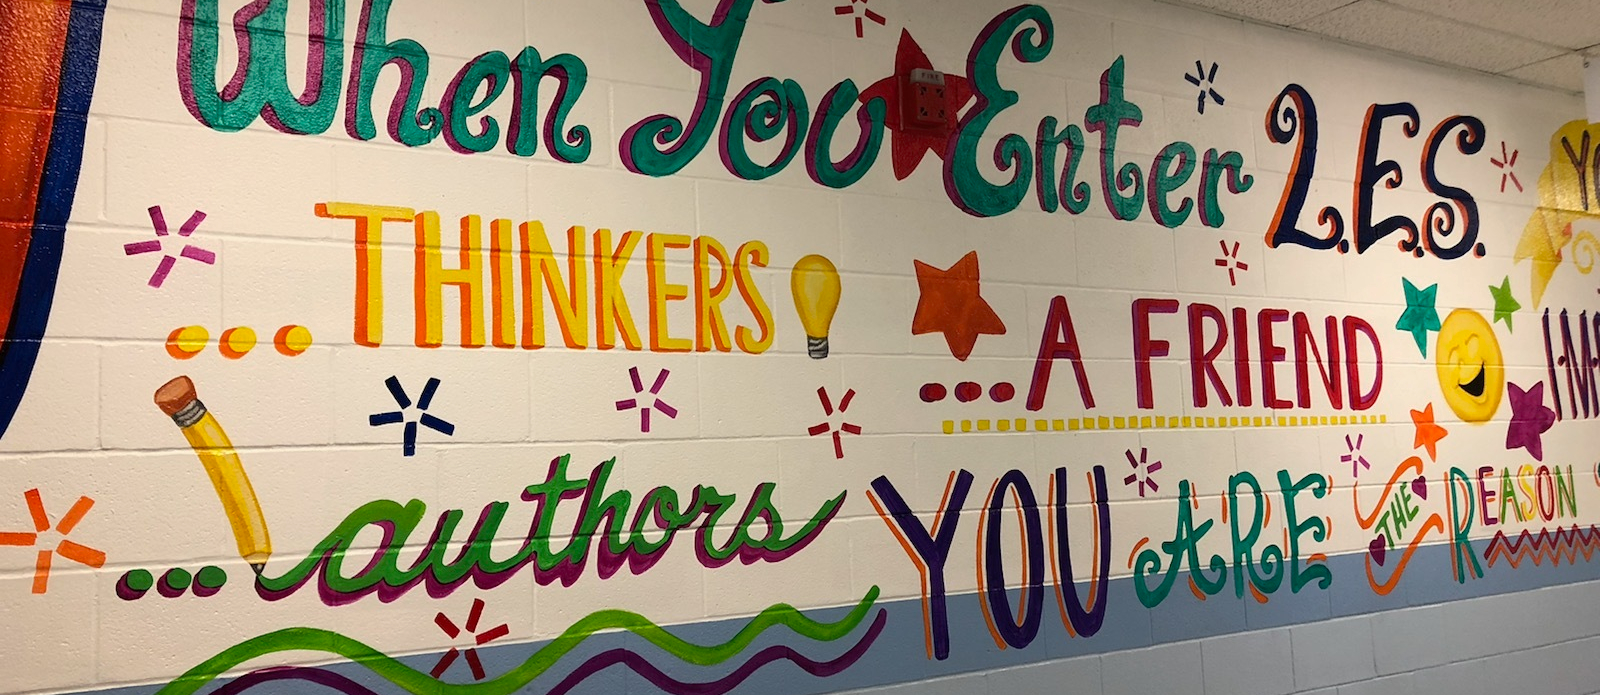 Mural wall - when you enter LES ... thinkers... a friend ...authors ... you are the reason